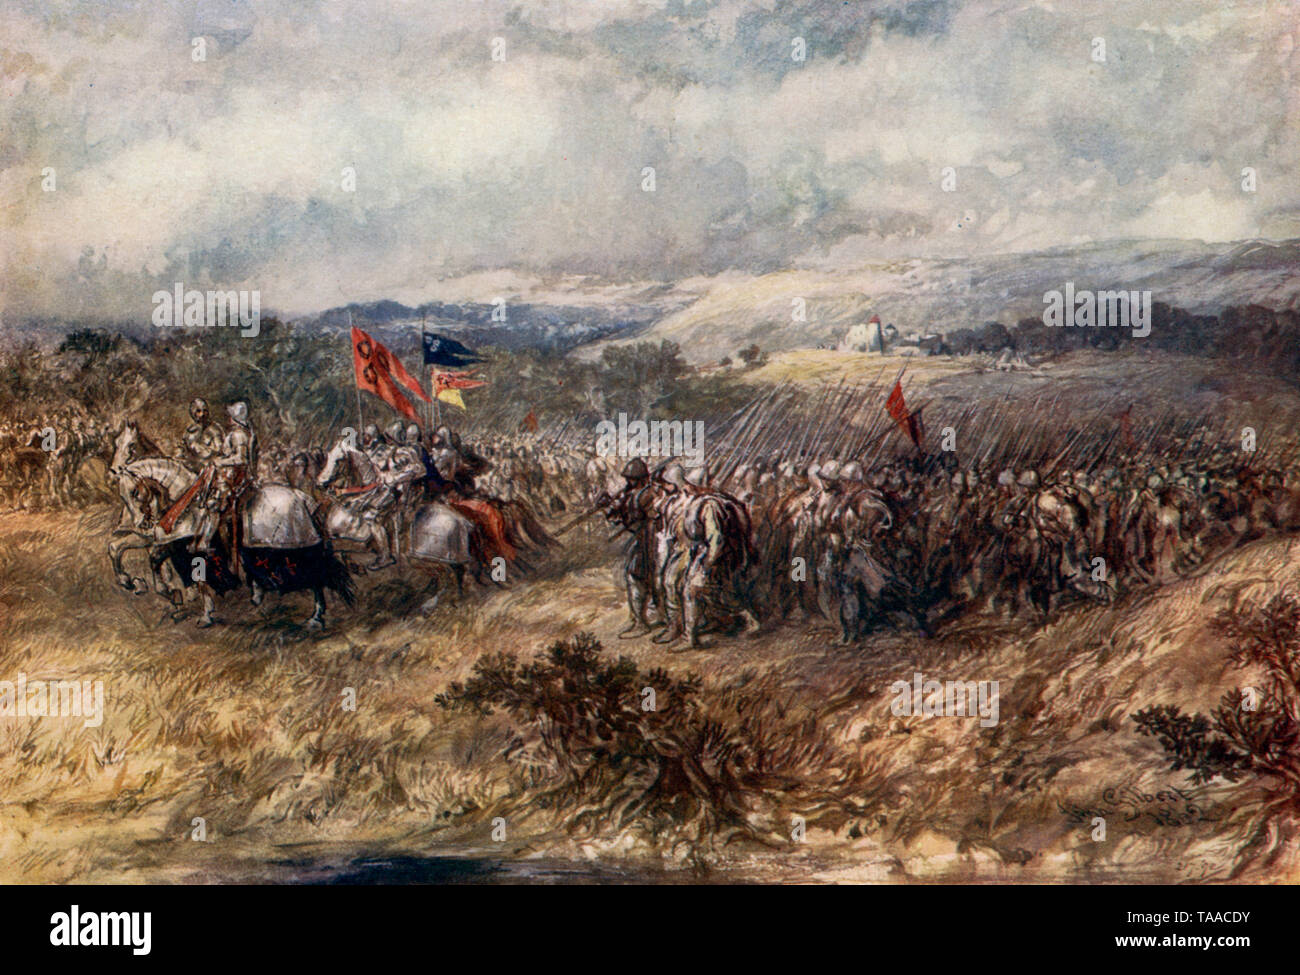 'Crusaders on the March' by Sir John Gilbert (1817-1897). Gilbert's paintings of historical and literary scenes display a theatrical romanticism that appealed greatly to Victorian taste. The term 'Crusade' is used to describe religious military campaigns conducted between the 11th and 16th centuries, predominately but not exclusively against Muslims in the near east. Stock Photo